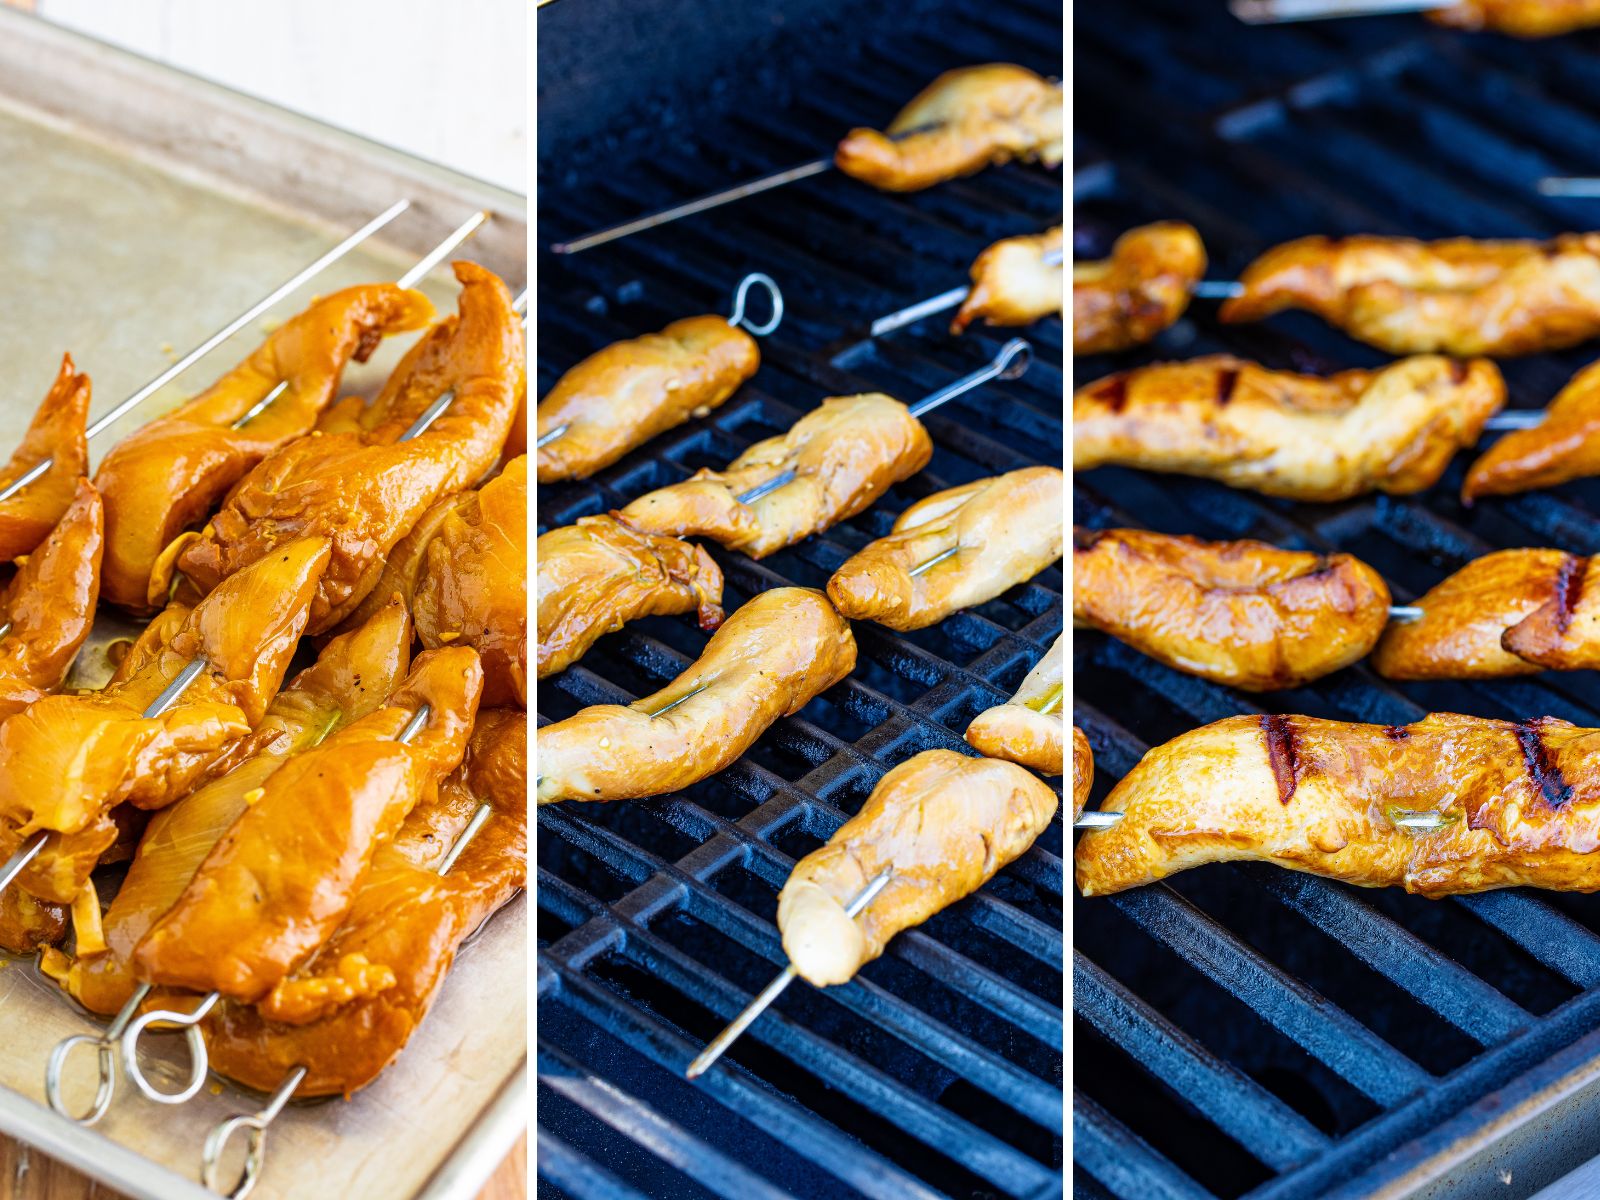 Marinated chicken on skewers, chicken being grilled on a grill and chicken tenders flipped and being grilled on the other side. 